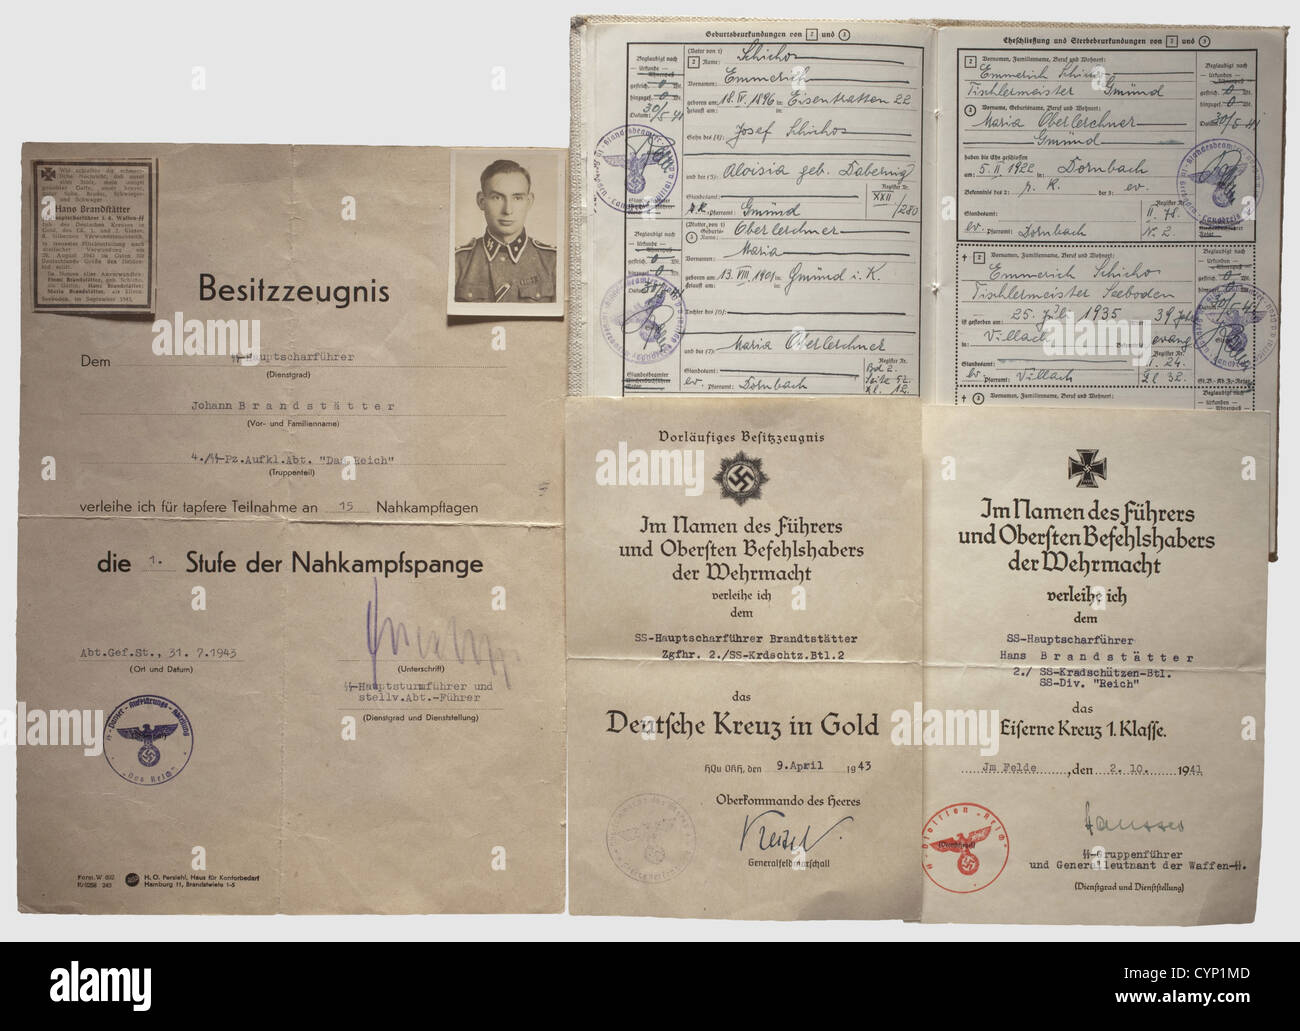 Documents of an SS-Hauptscharführer,in Motorised Rifle Battalion 'Das Reich'.Preliminary possession documents for the German Cross in Gold dated 9 April 1943,for the Close Combat Clasp 1st Class dated 31 July 1943 and for the Wound Badge in Silver dated 3 March 1943 as well as the award document for the Iron Cross 1st Class of 1939 dated 2 October 1941 with signature in ink of Hausser.Folded.Included is an ID photo,an obituary dated 26 August 1943,birth and baptismal certificates,marriage document and proof of ancestry,historic,historical,people,193,Additional-Rights-Clearences-Not Available Stock Photo